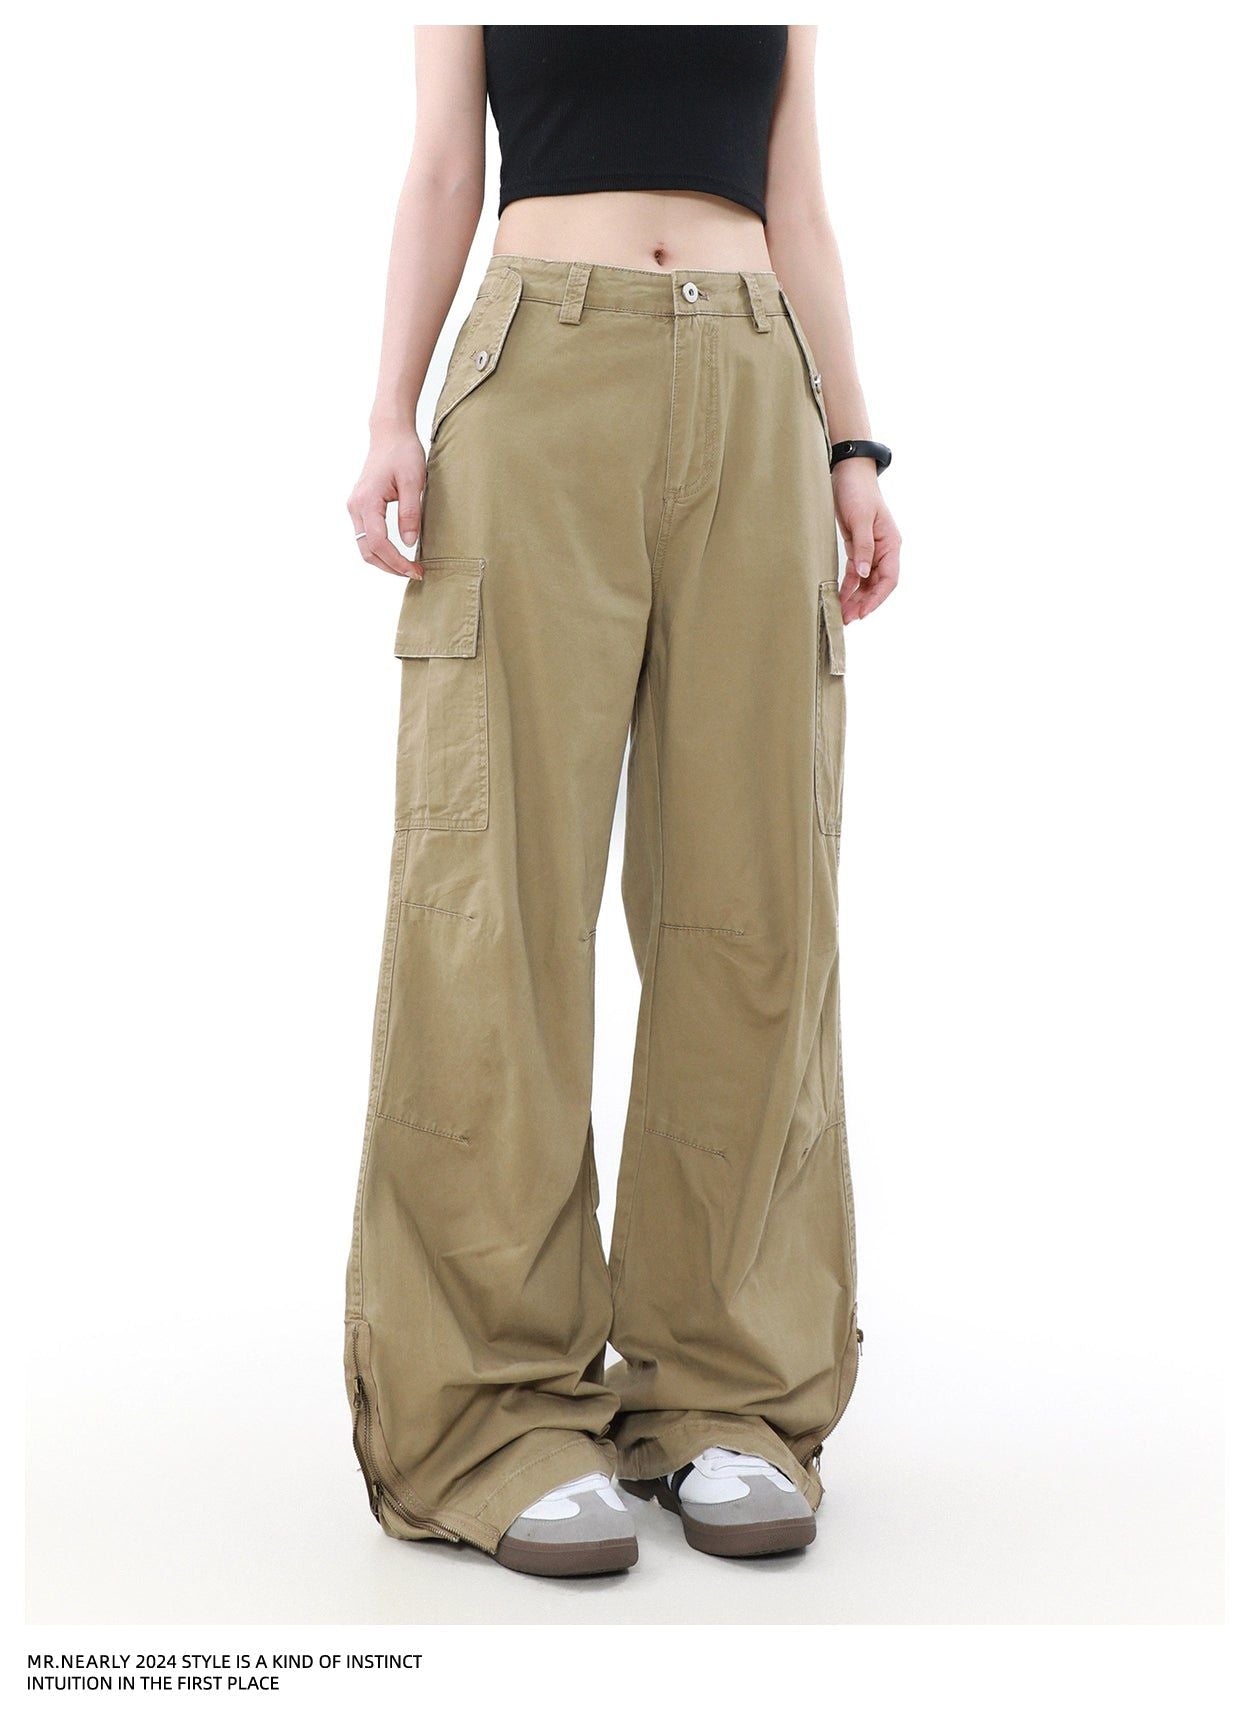 Faded Plain Zip Cargo Pants Korean Street Fashion Pants By Mr Nearly Shop Online at OH Vault